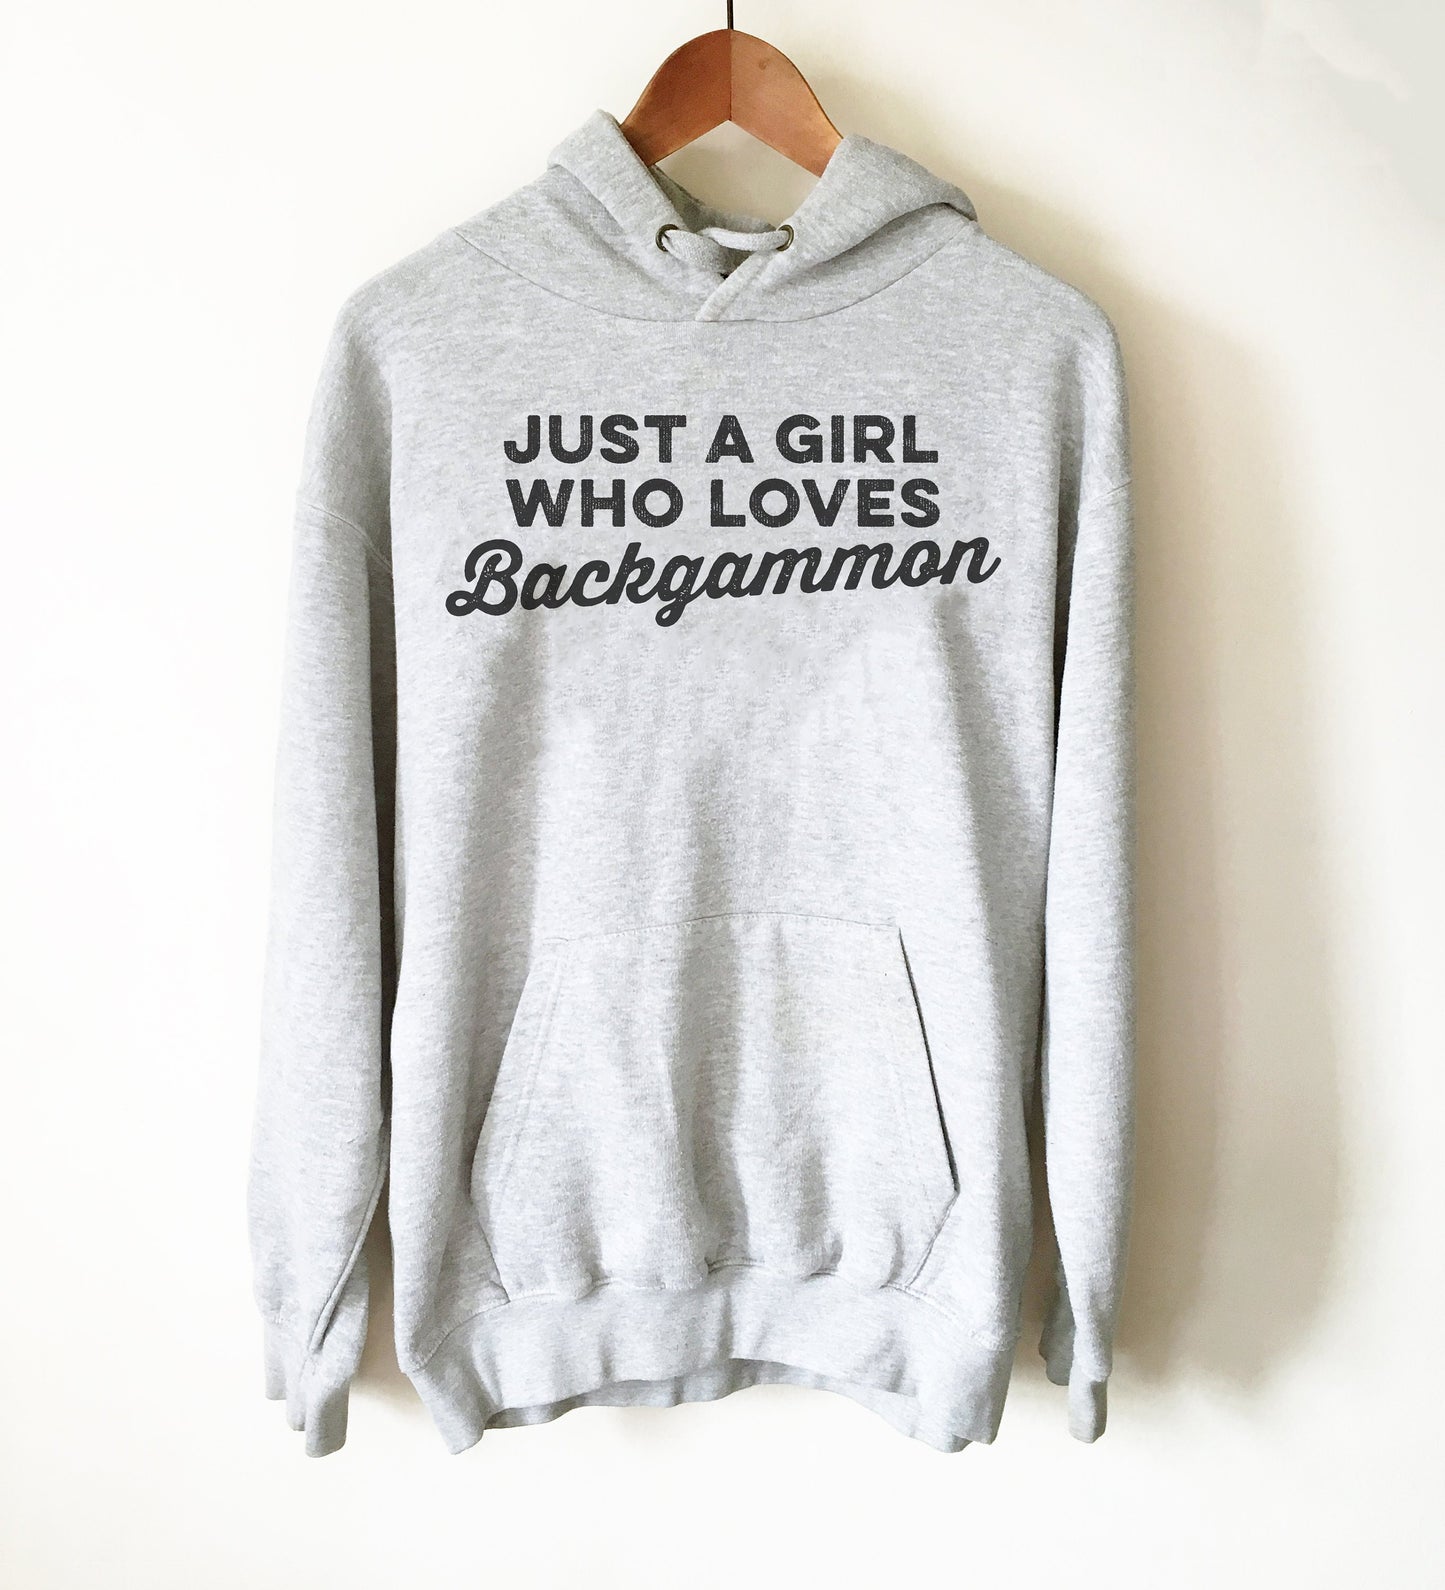 Just A Girl Who Loves Backgammon Hoodie - Backgammon Gift, Board Game Shirt, Board Game Gift, Board Game Lover, Board Game Organizer